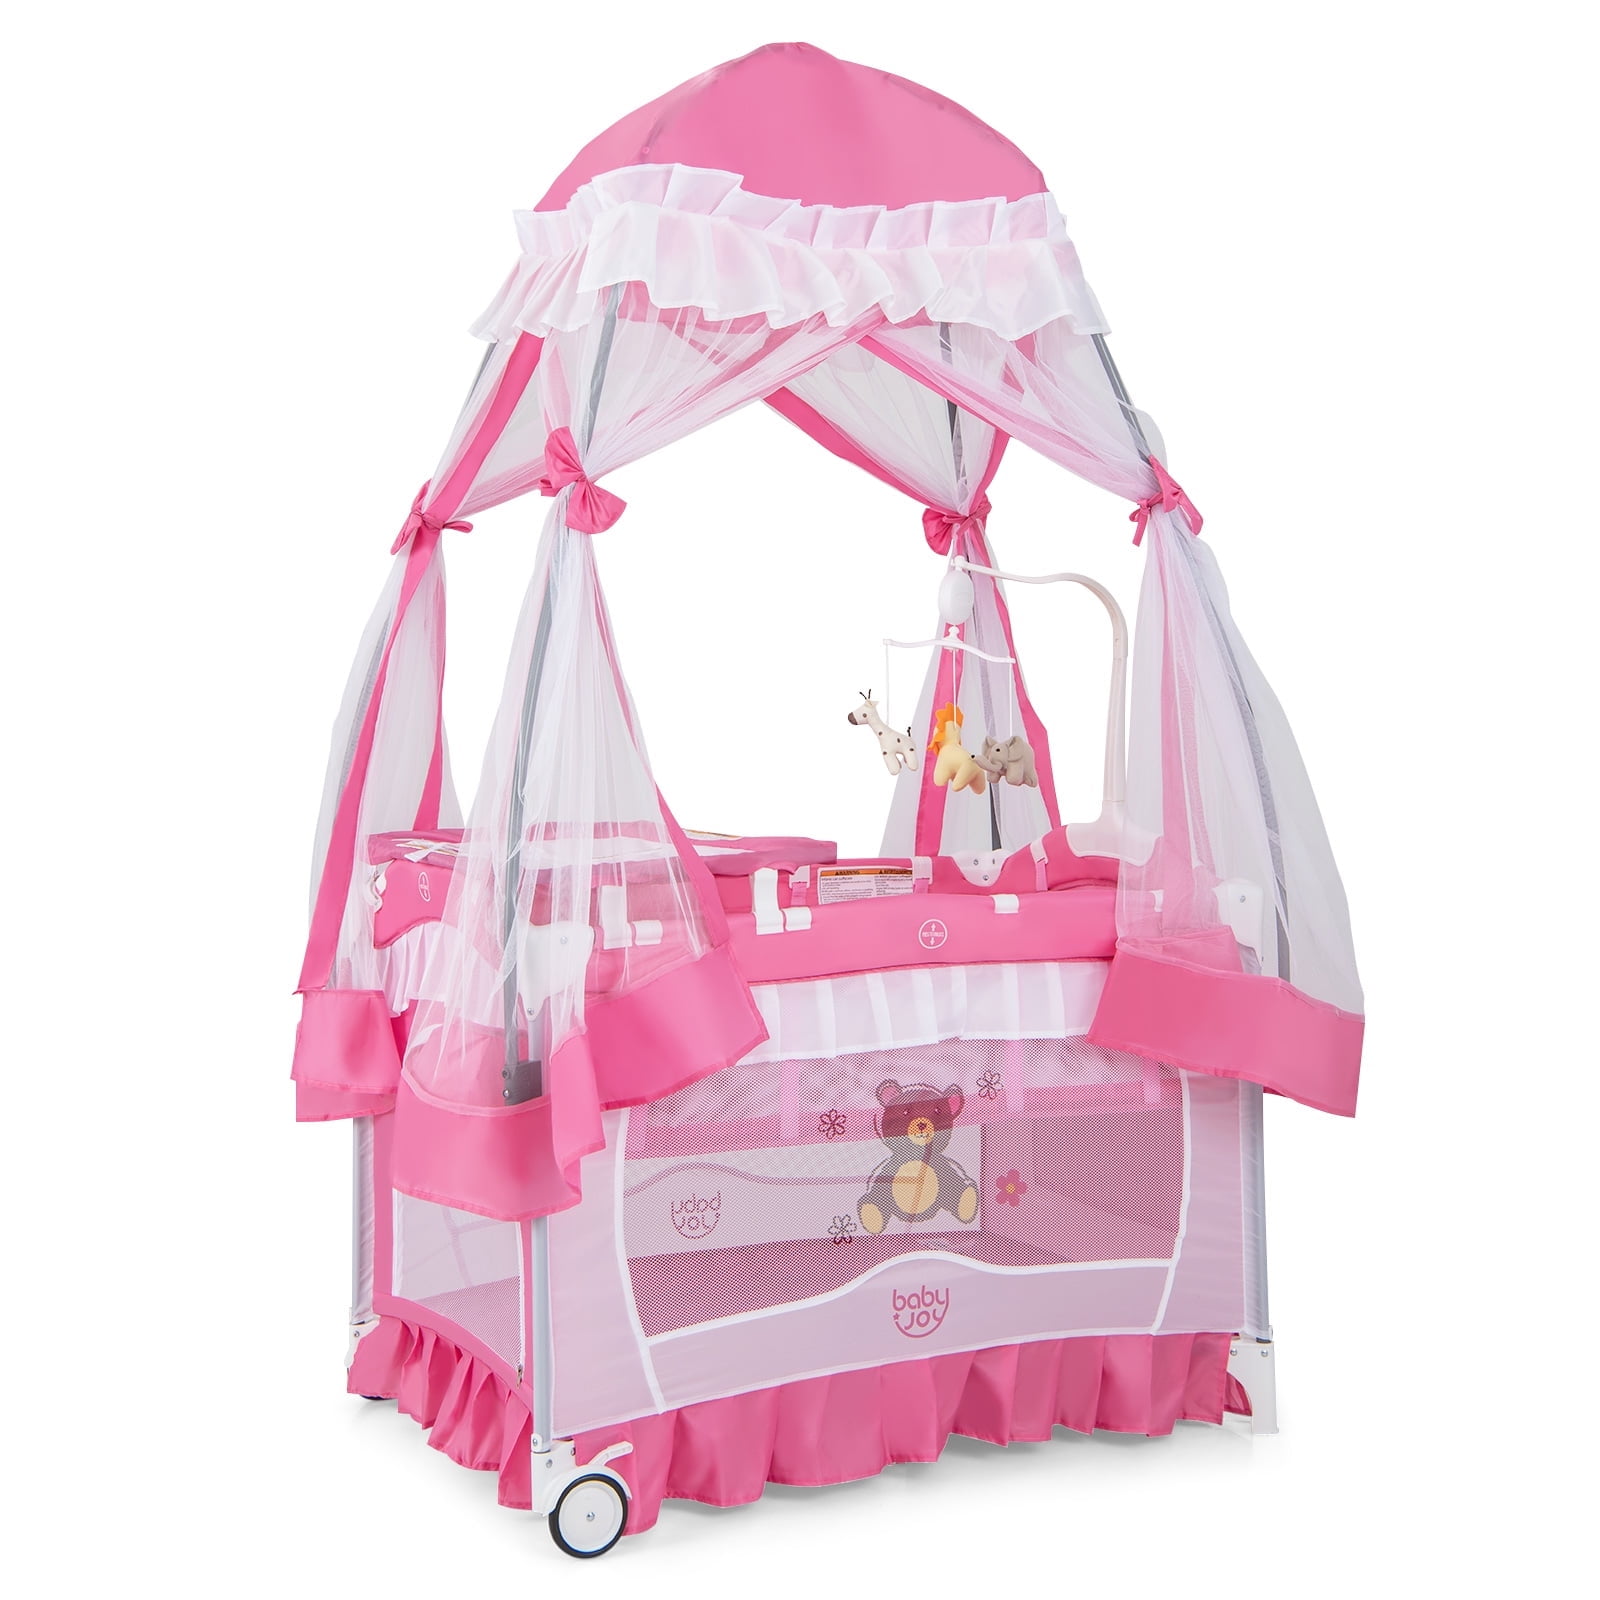 Chicco Lullaby All-in-One Portable Playard with Bassinet and Snap